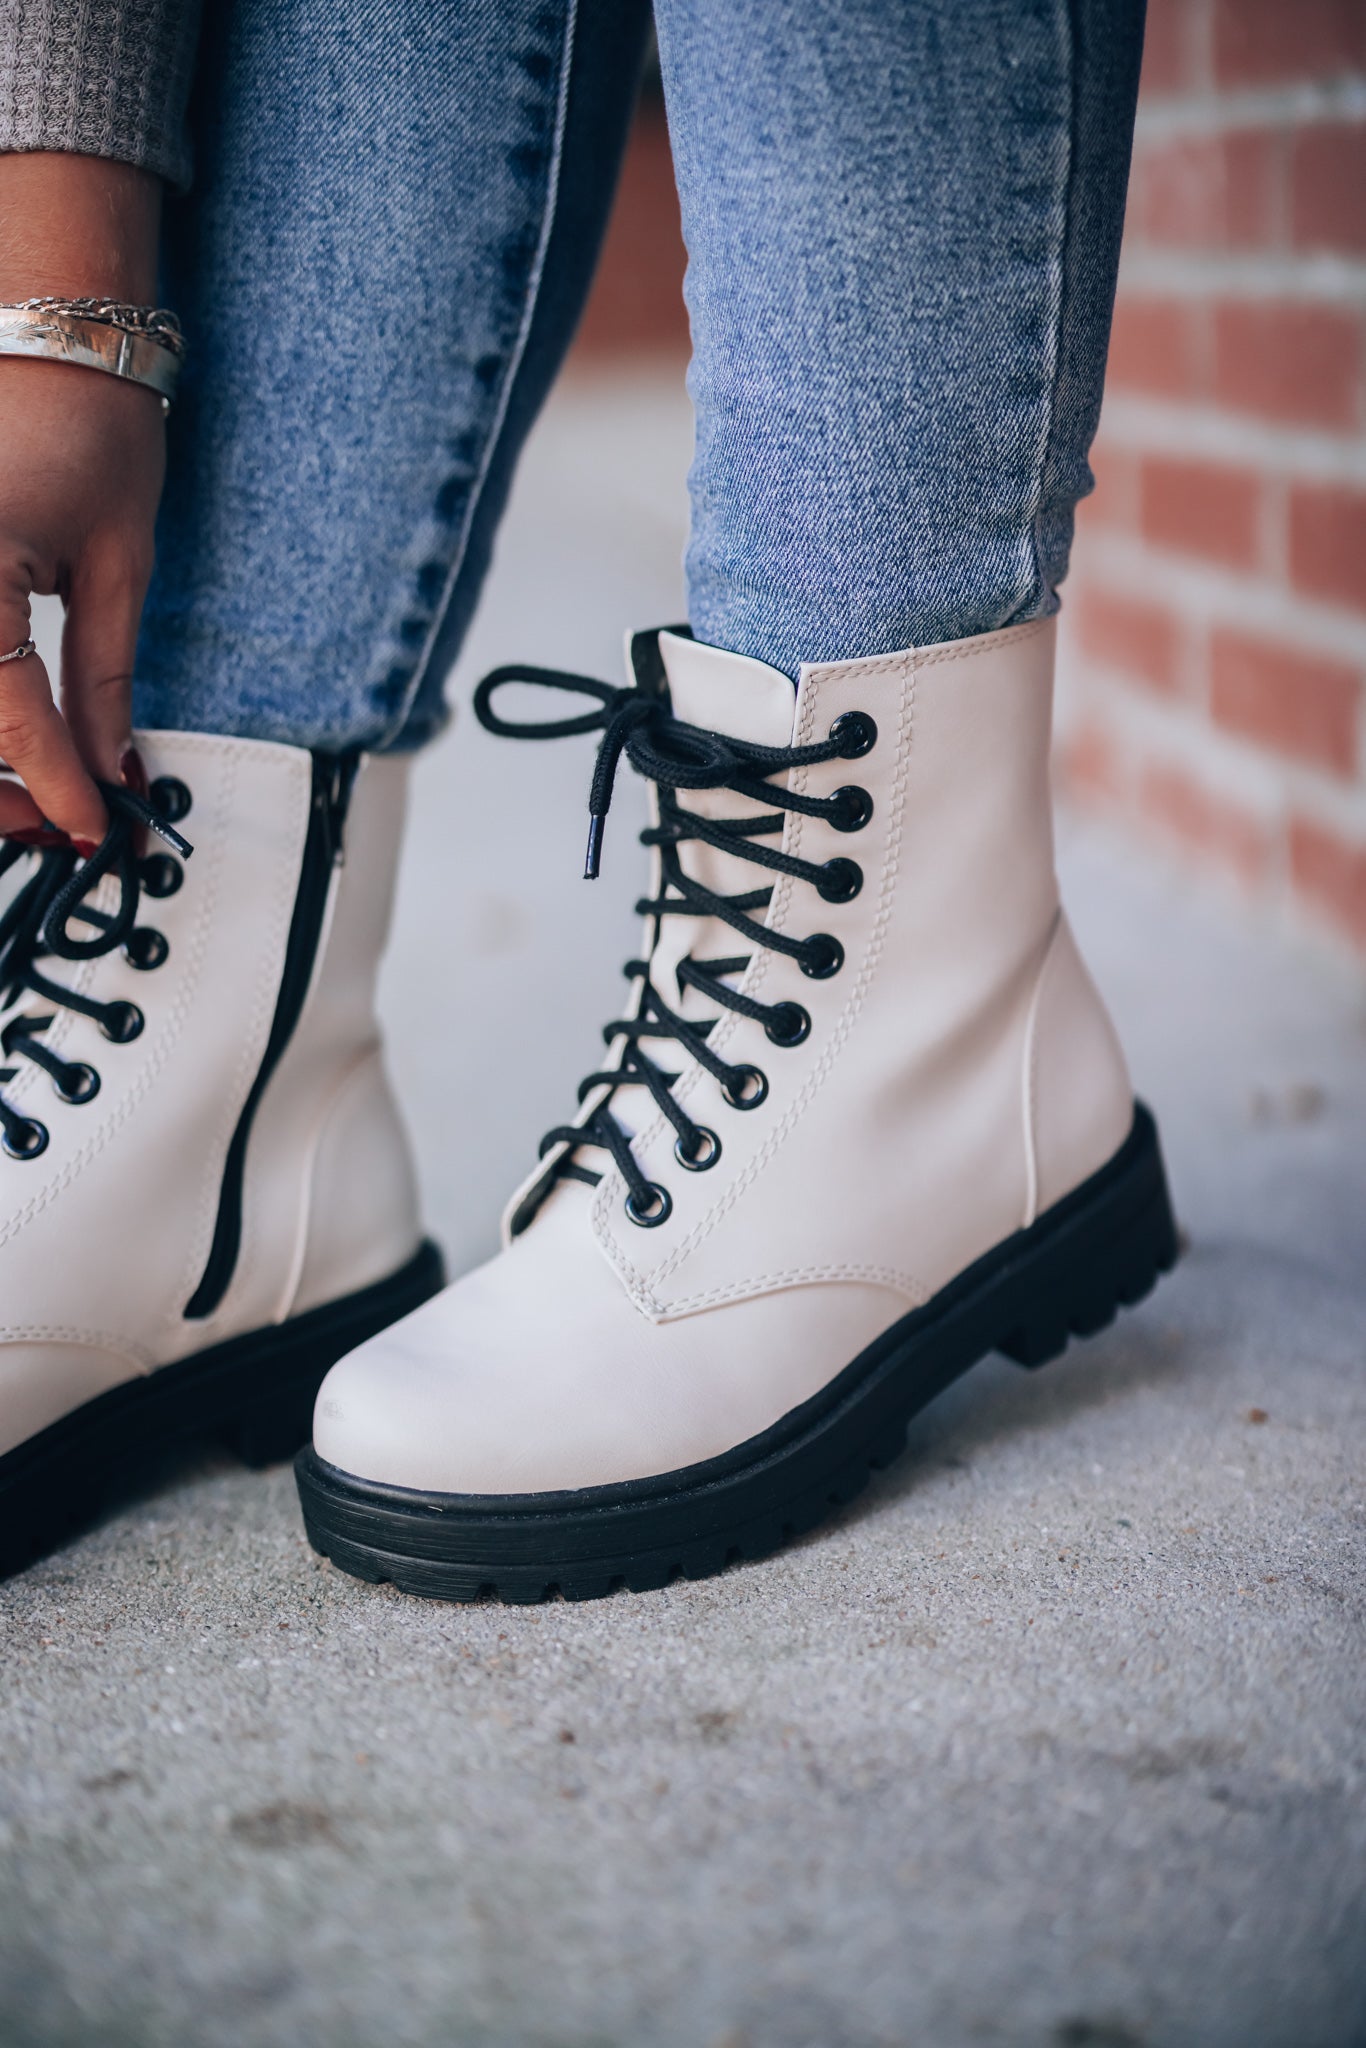 West Combat Boots (White)